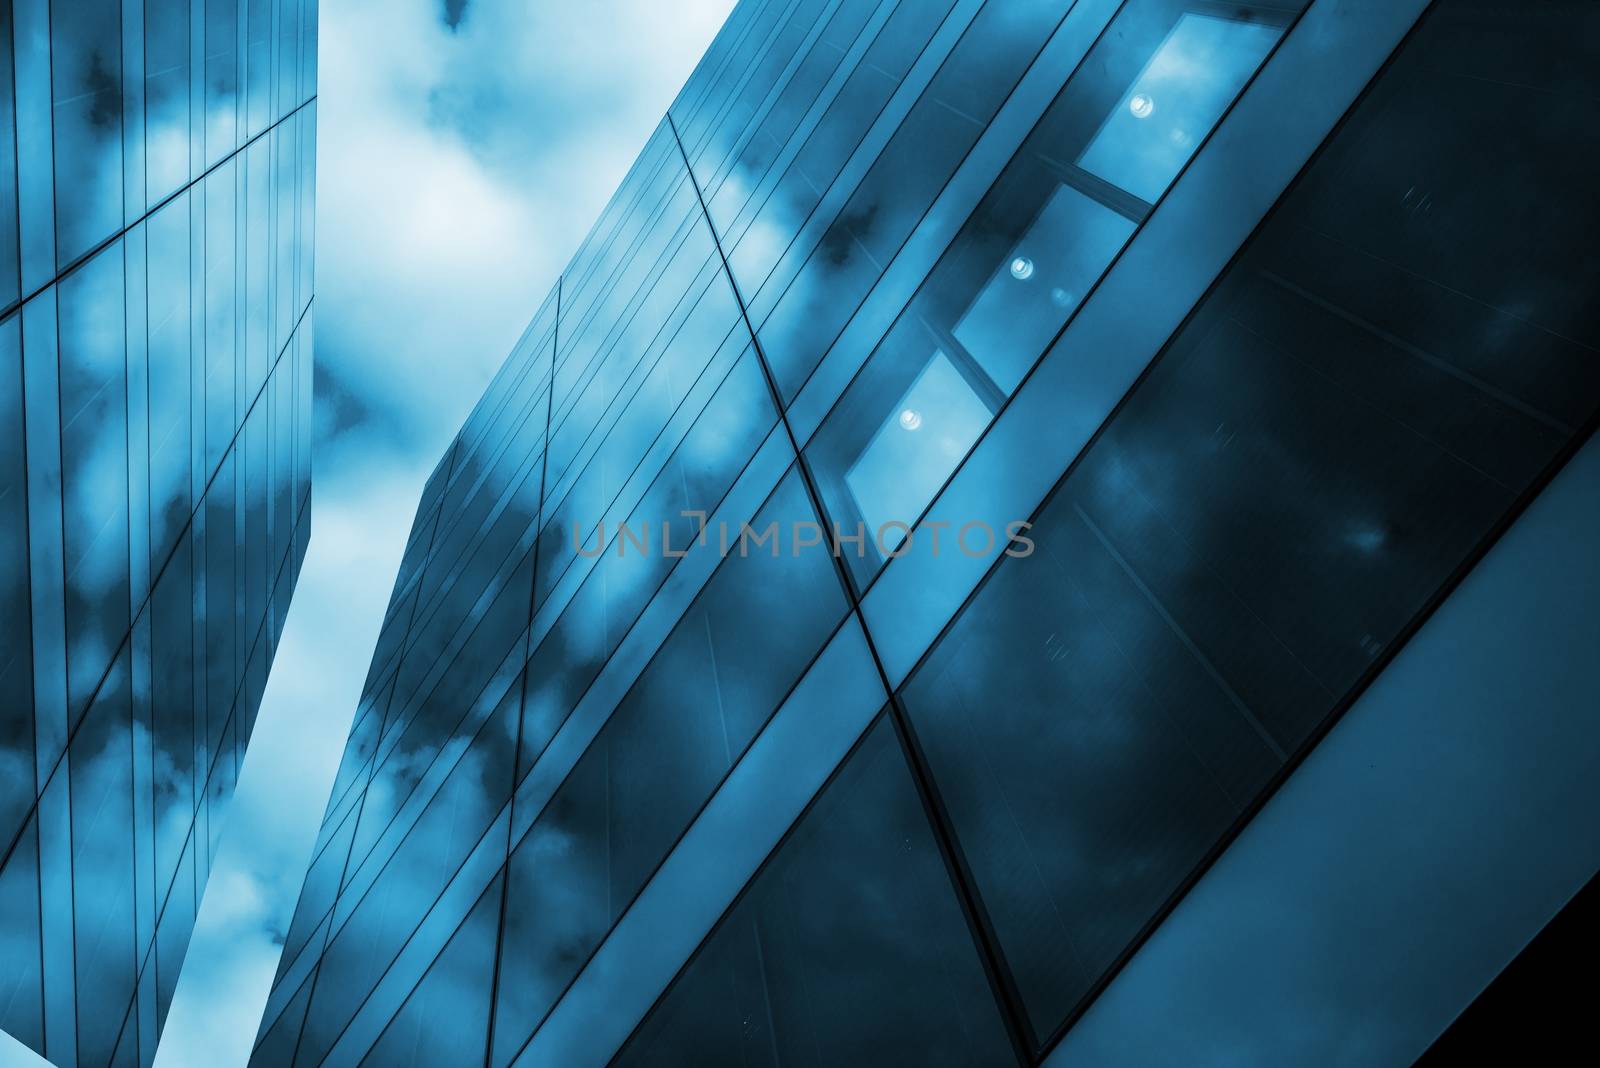 Modern Glass and Metal Architecture Concept Photo. 